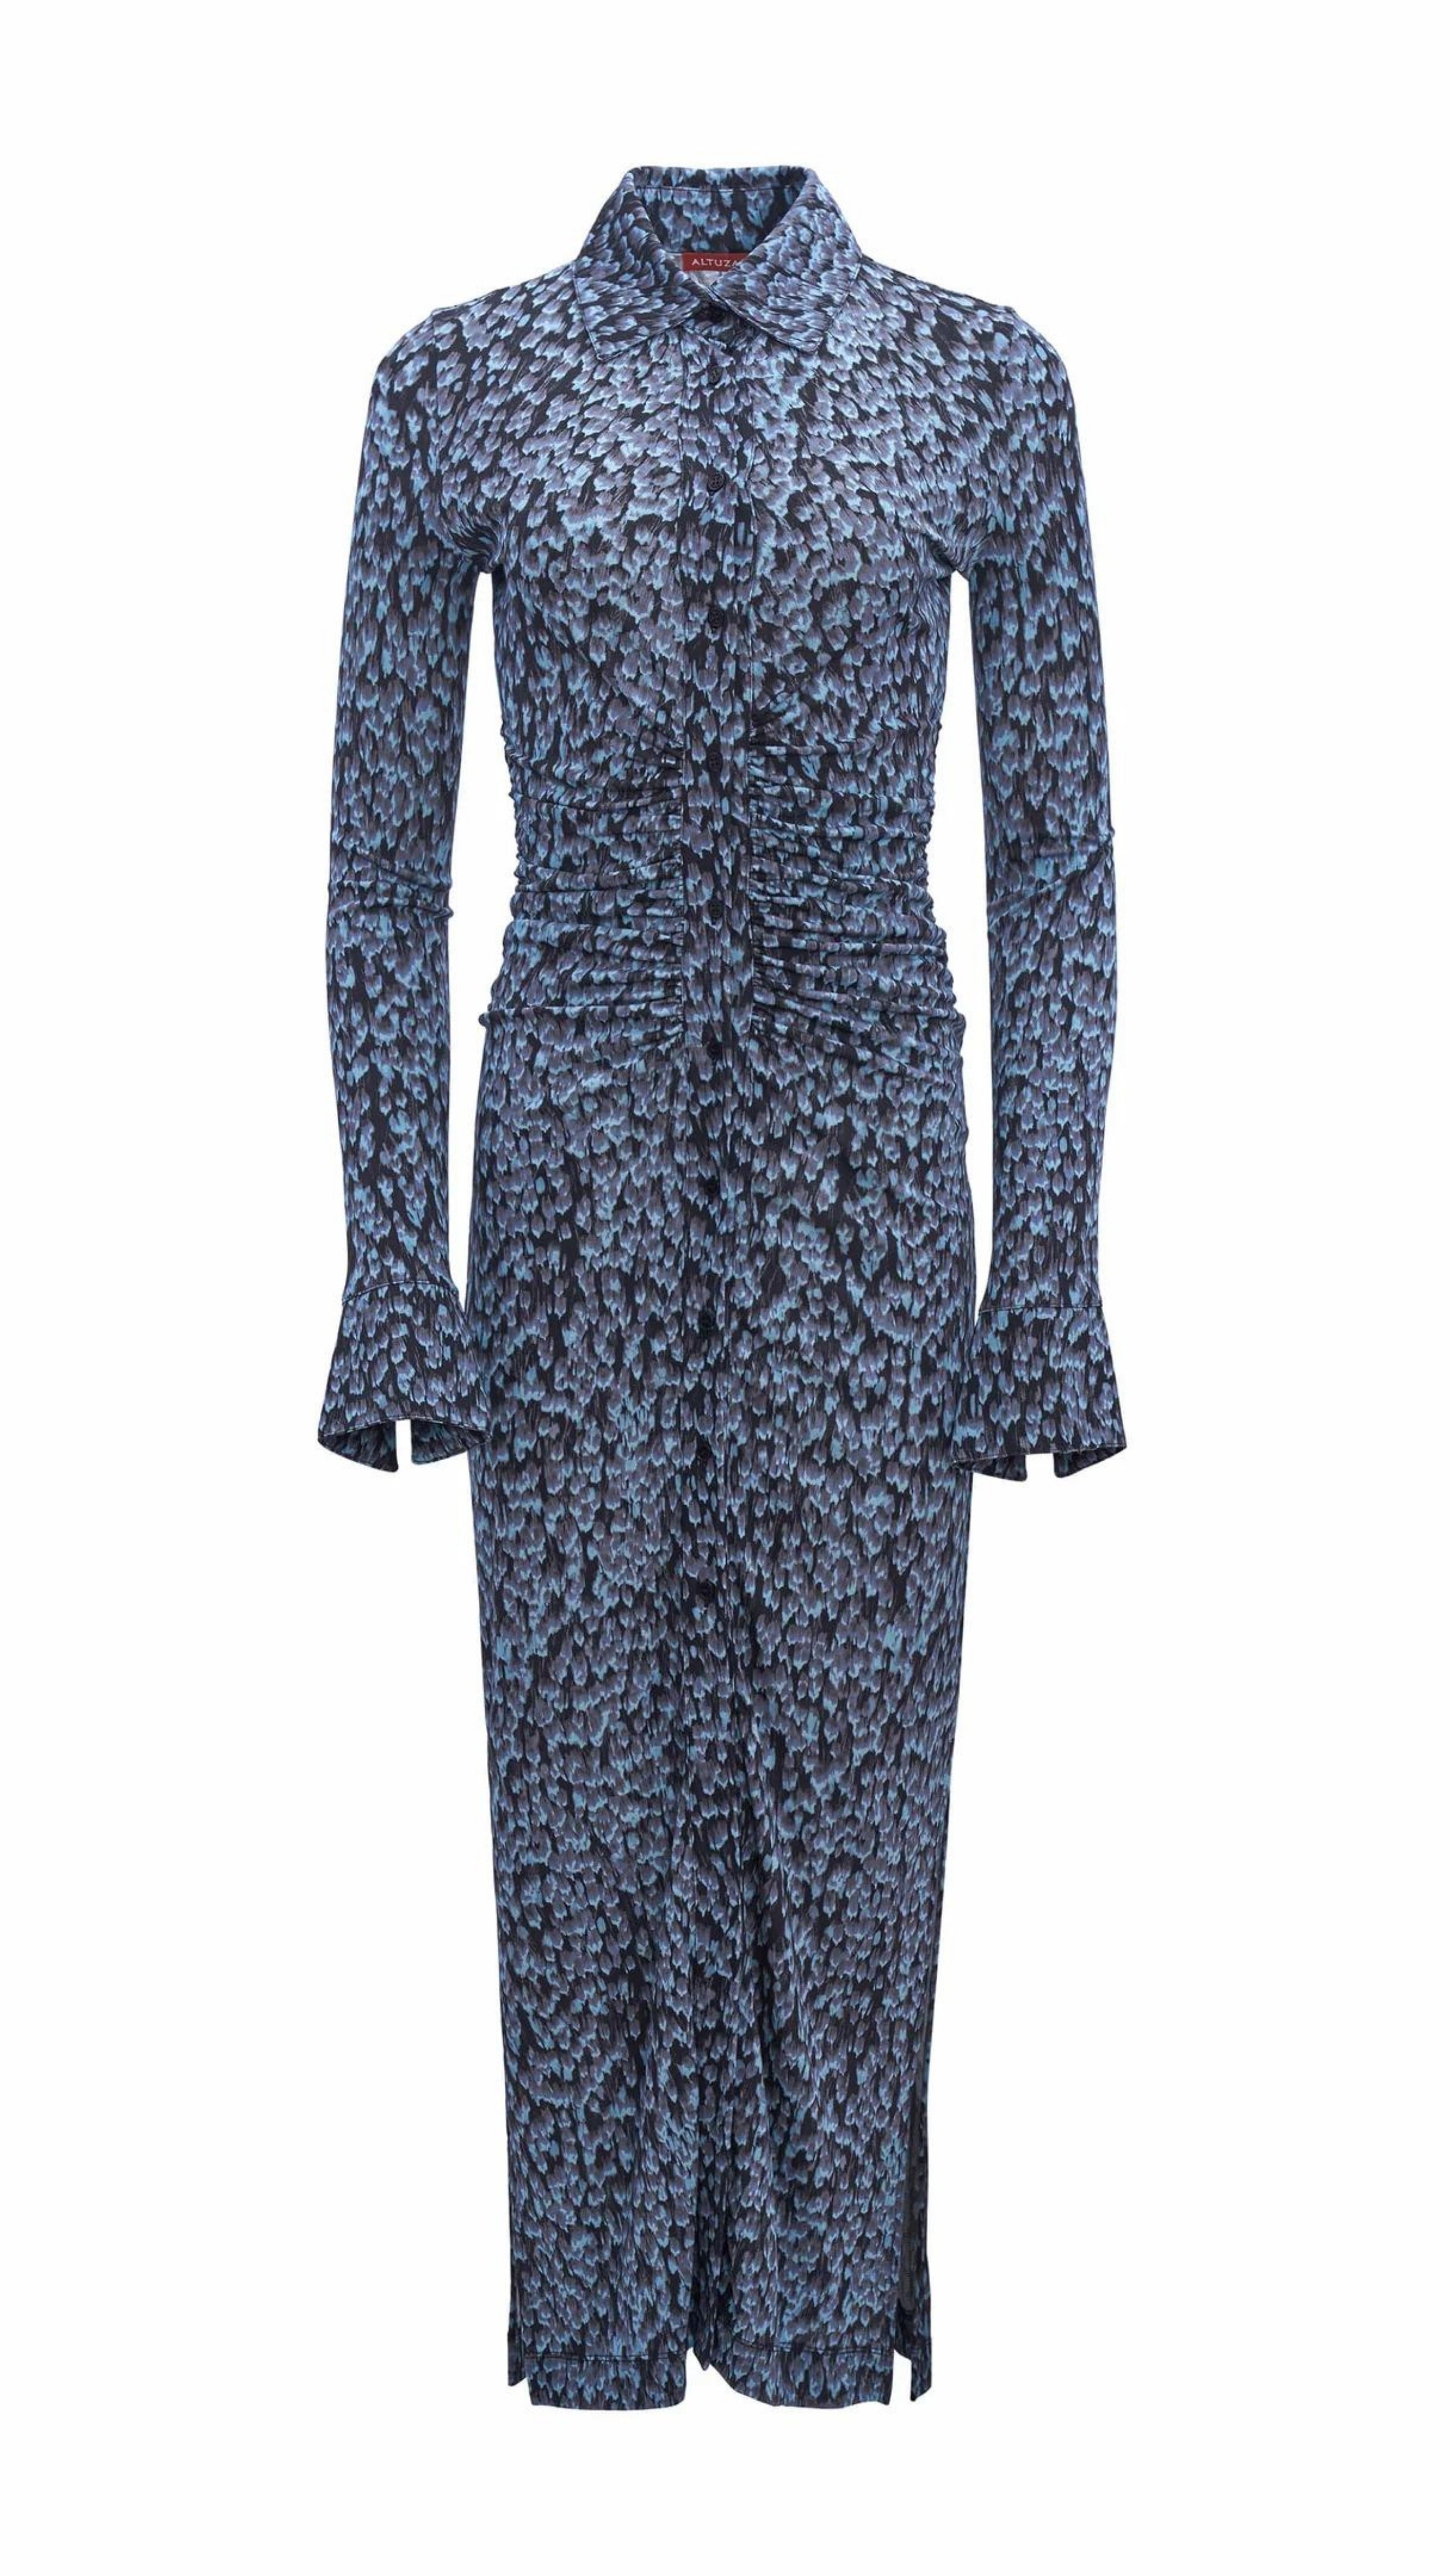 Altuzarra Claudia Dress in Murex Feather Print. Made from the softest jersey material in the Murex Feather print of various blue tones. This dress buttons up the front, has long sleeves and a shad collar. Ruching at the waist provides an incredible fit. Product photo facing front.